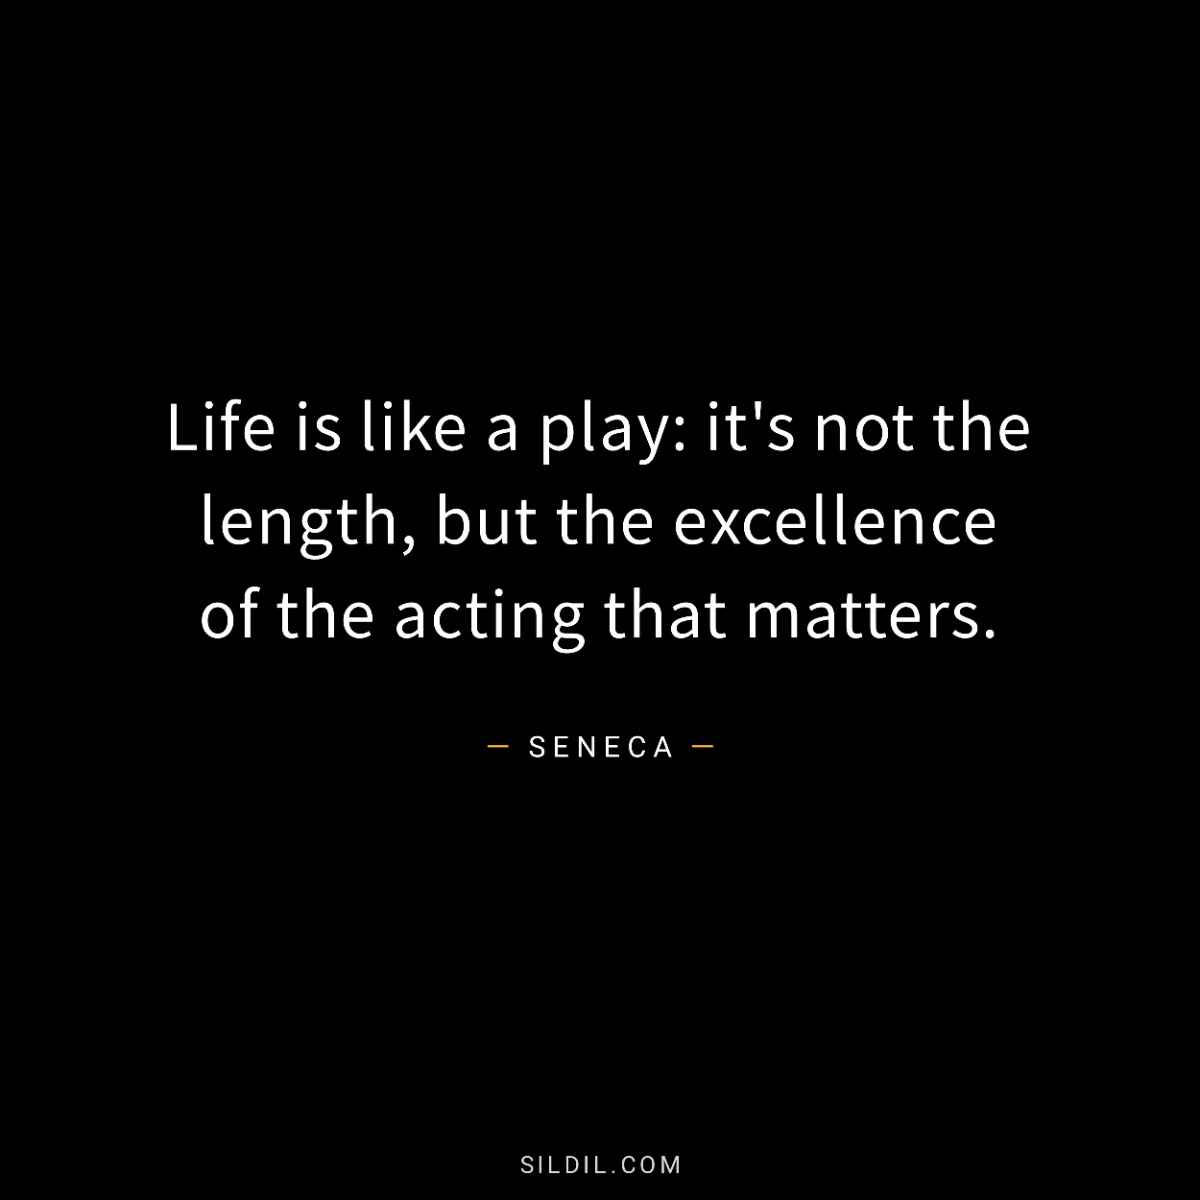 Life is like a play: it's not the length, but the excellence of the acting that matters.